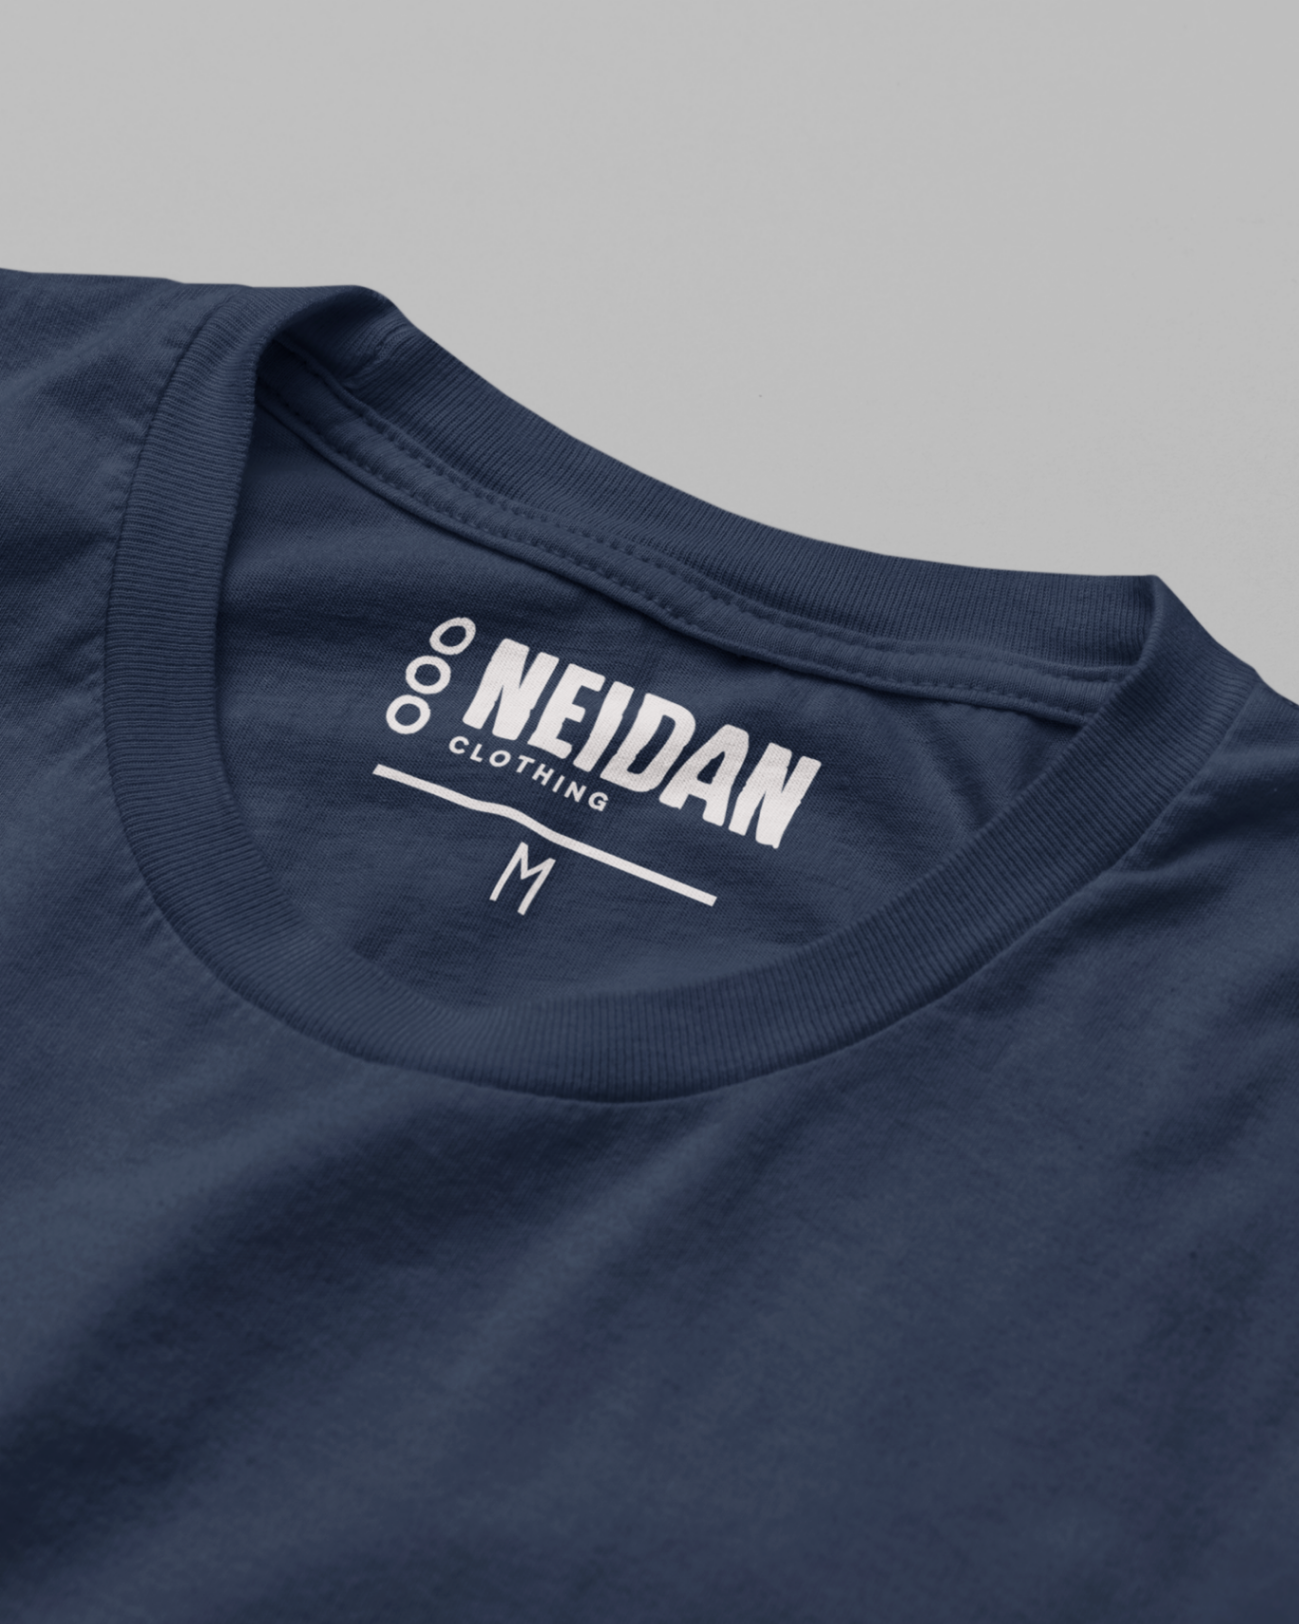 closeup of a navy t shirt neck label with neidan clothing logo